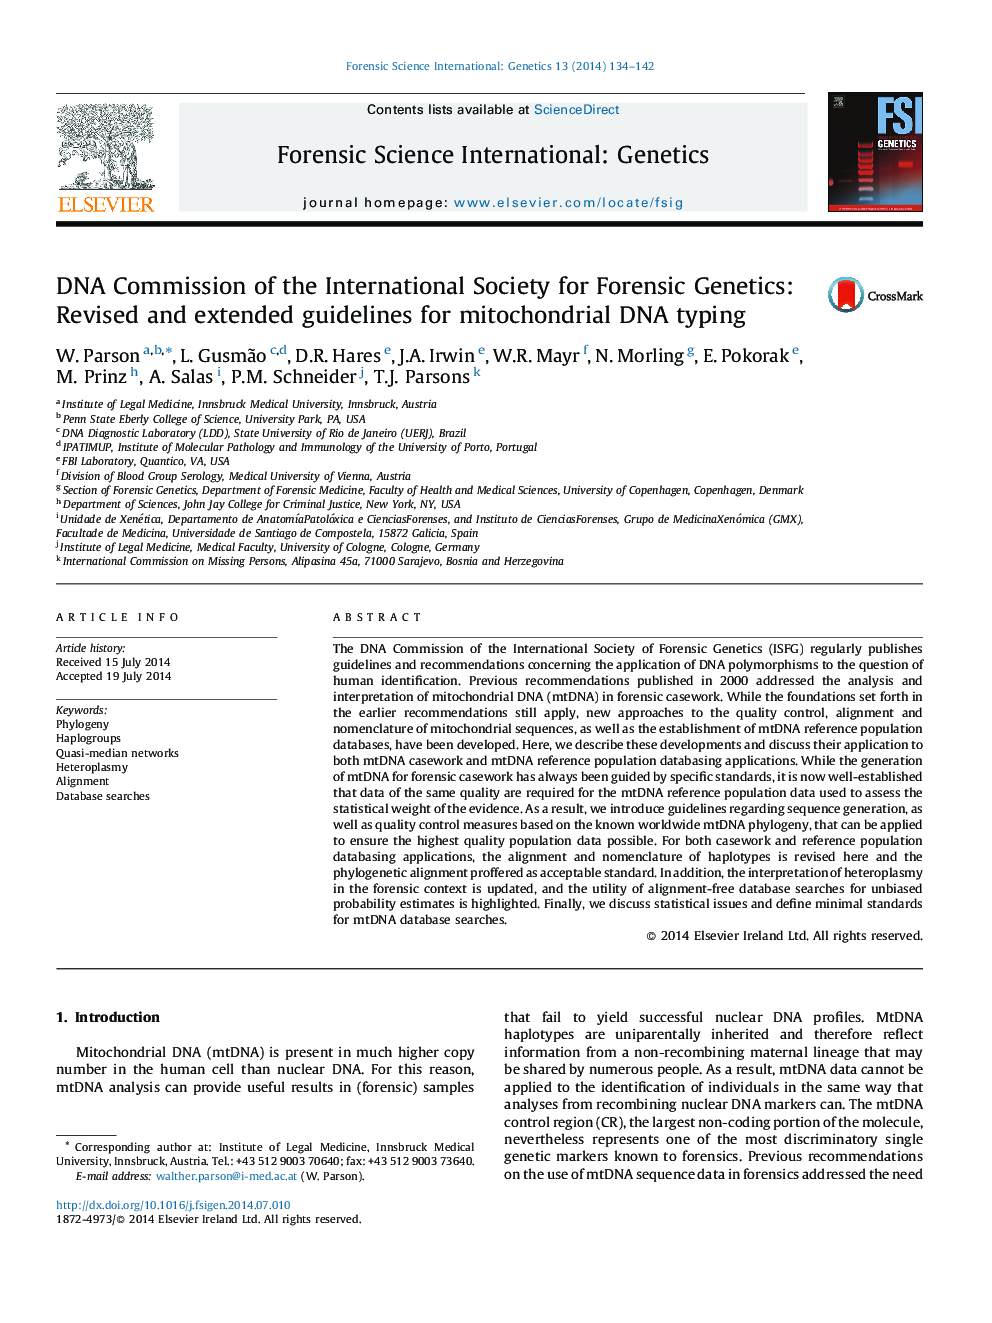 DNA Commission of the International Society for Forensic Genetics: Revised and extended guidelines for mitochondrial DNA typing